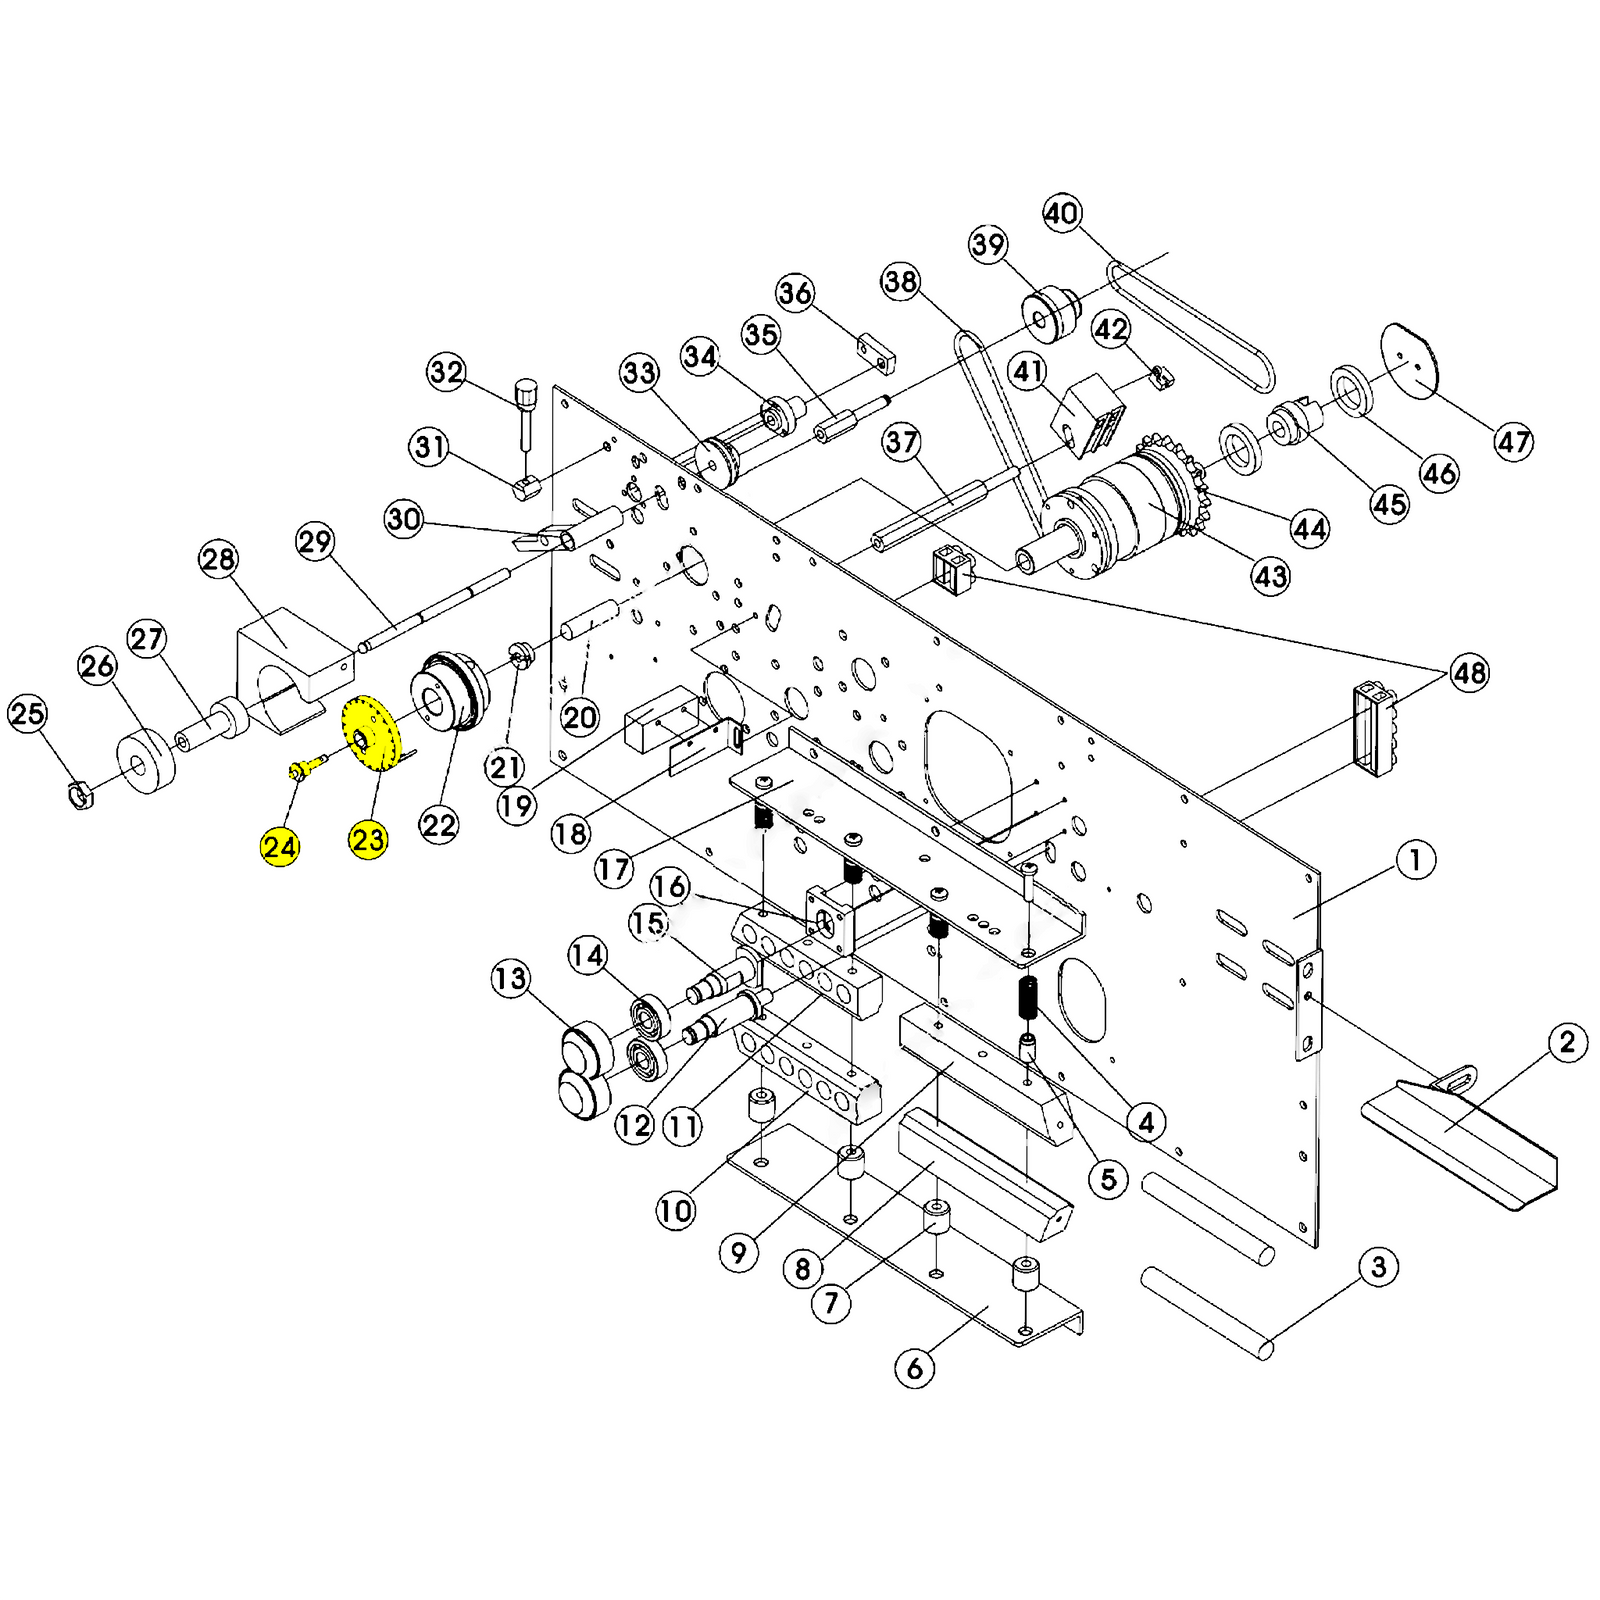 Diagram of a continuous band sealer and its components, with the pin wheel replacement part highlighted in yellow.